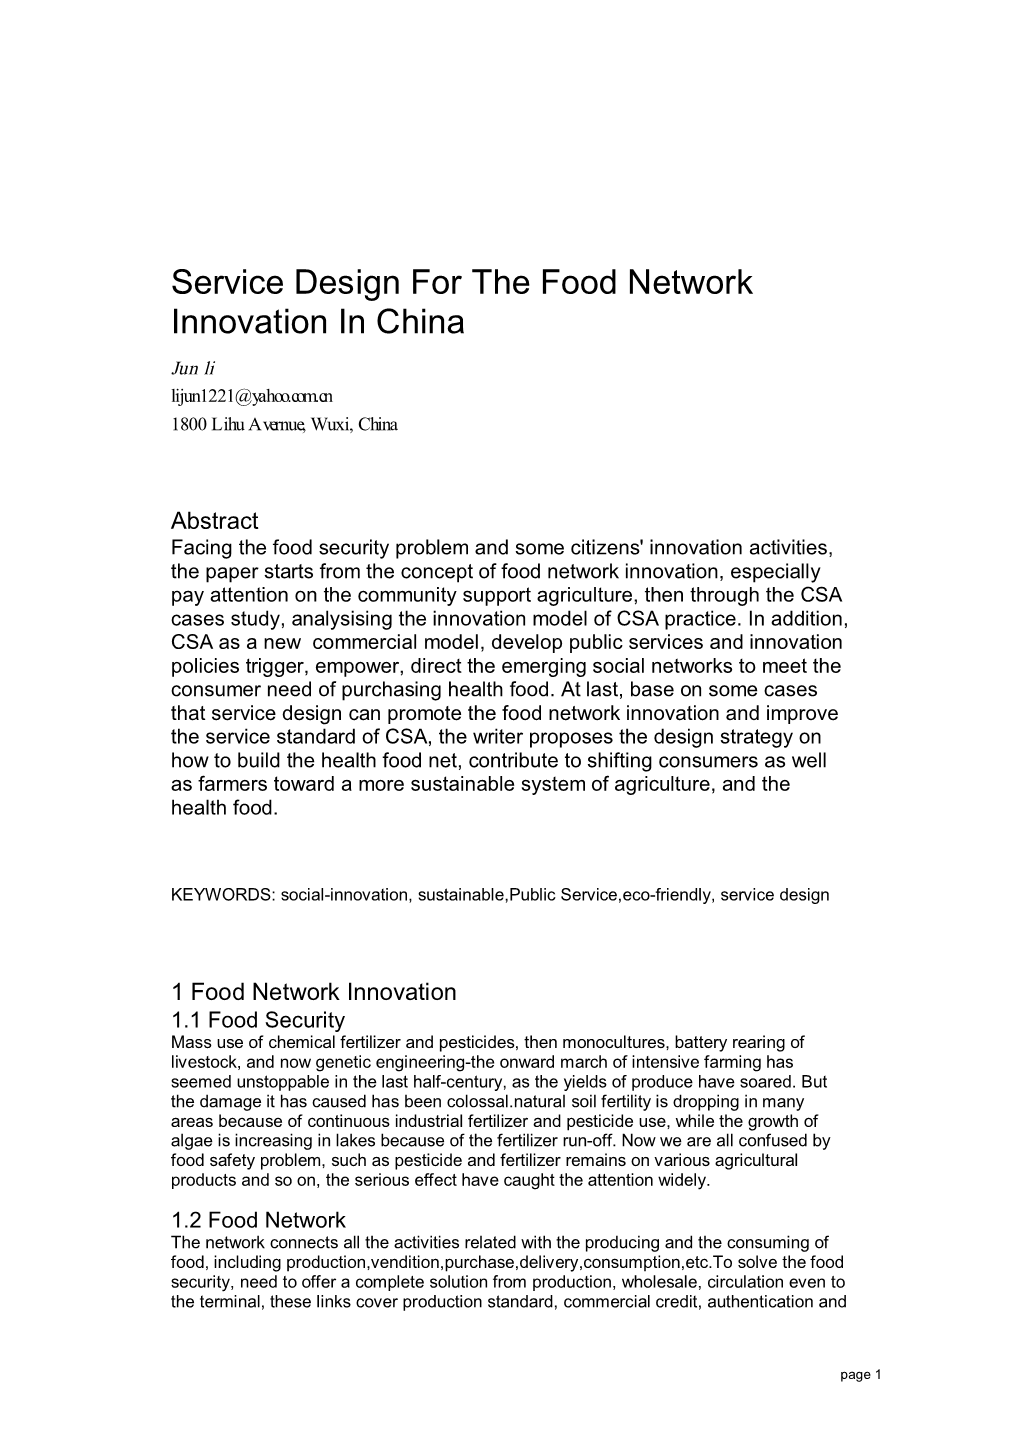 Service Design for the Food Network Innovation in China